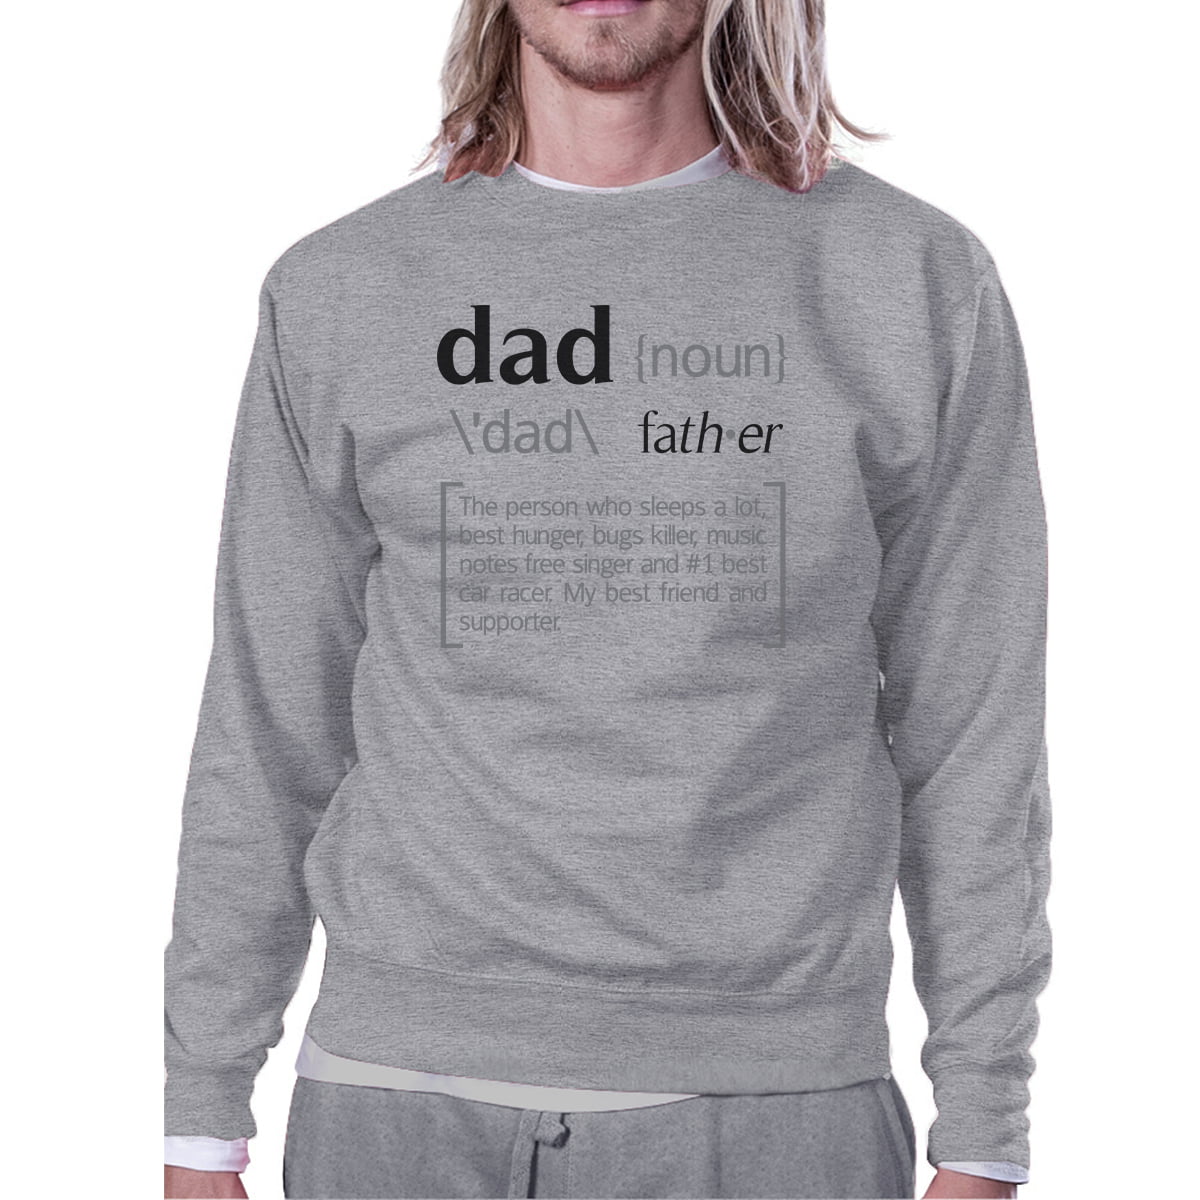 Birthday gift for him Embroider saying Rad Dad Cozy Mens Crew Neck Sweatshirt Fathers day present